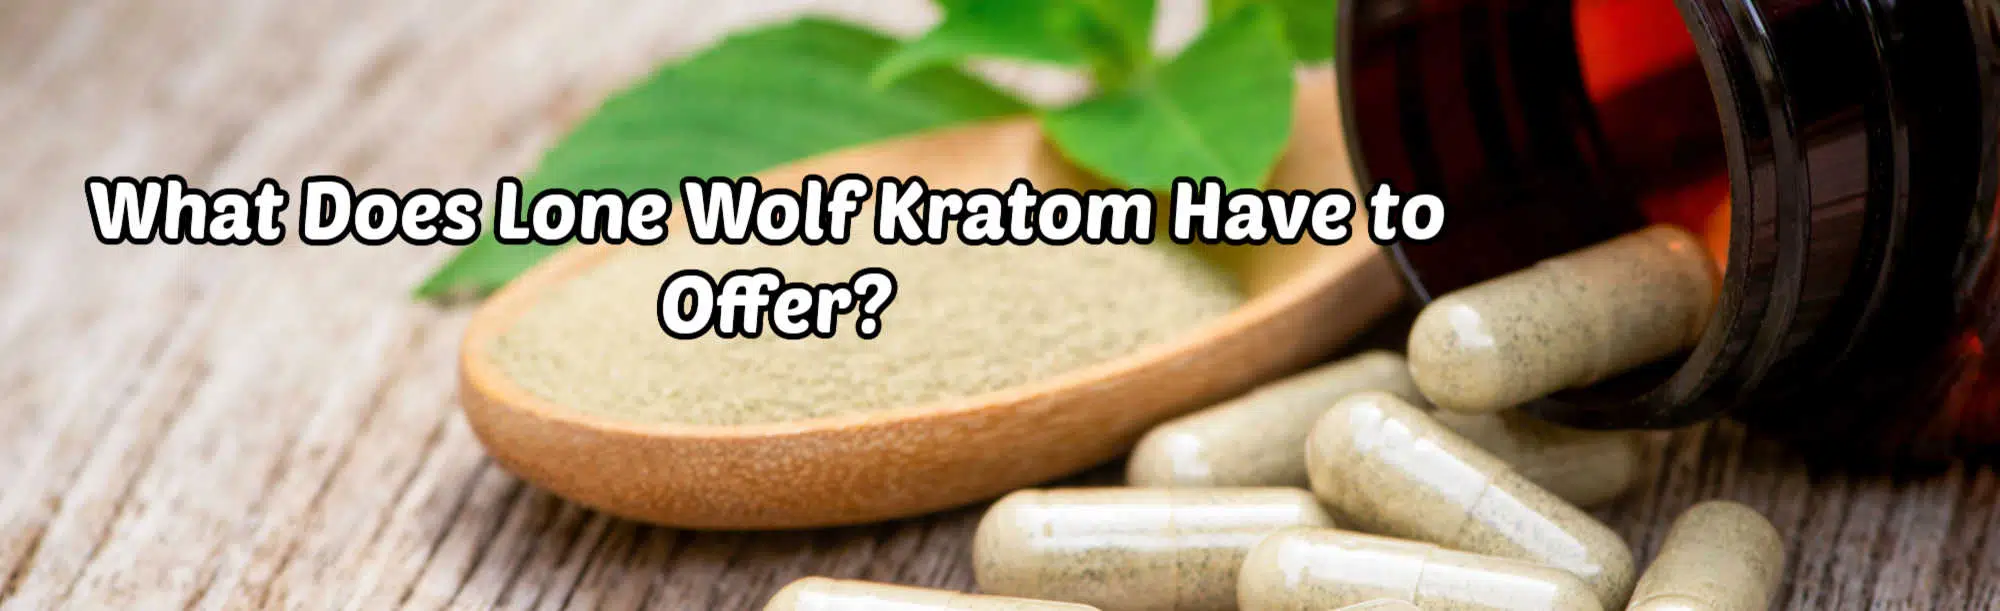 "What does lone wolf kratom has to offer?" banner